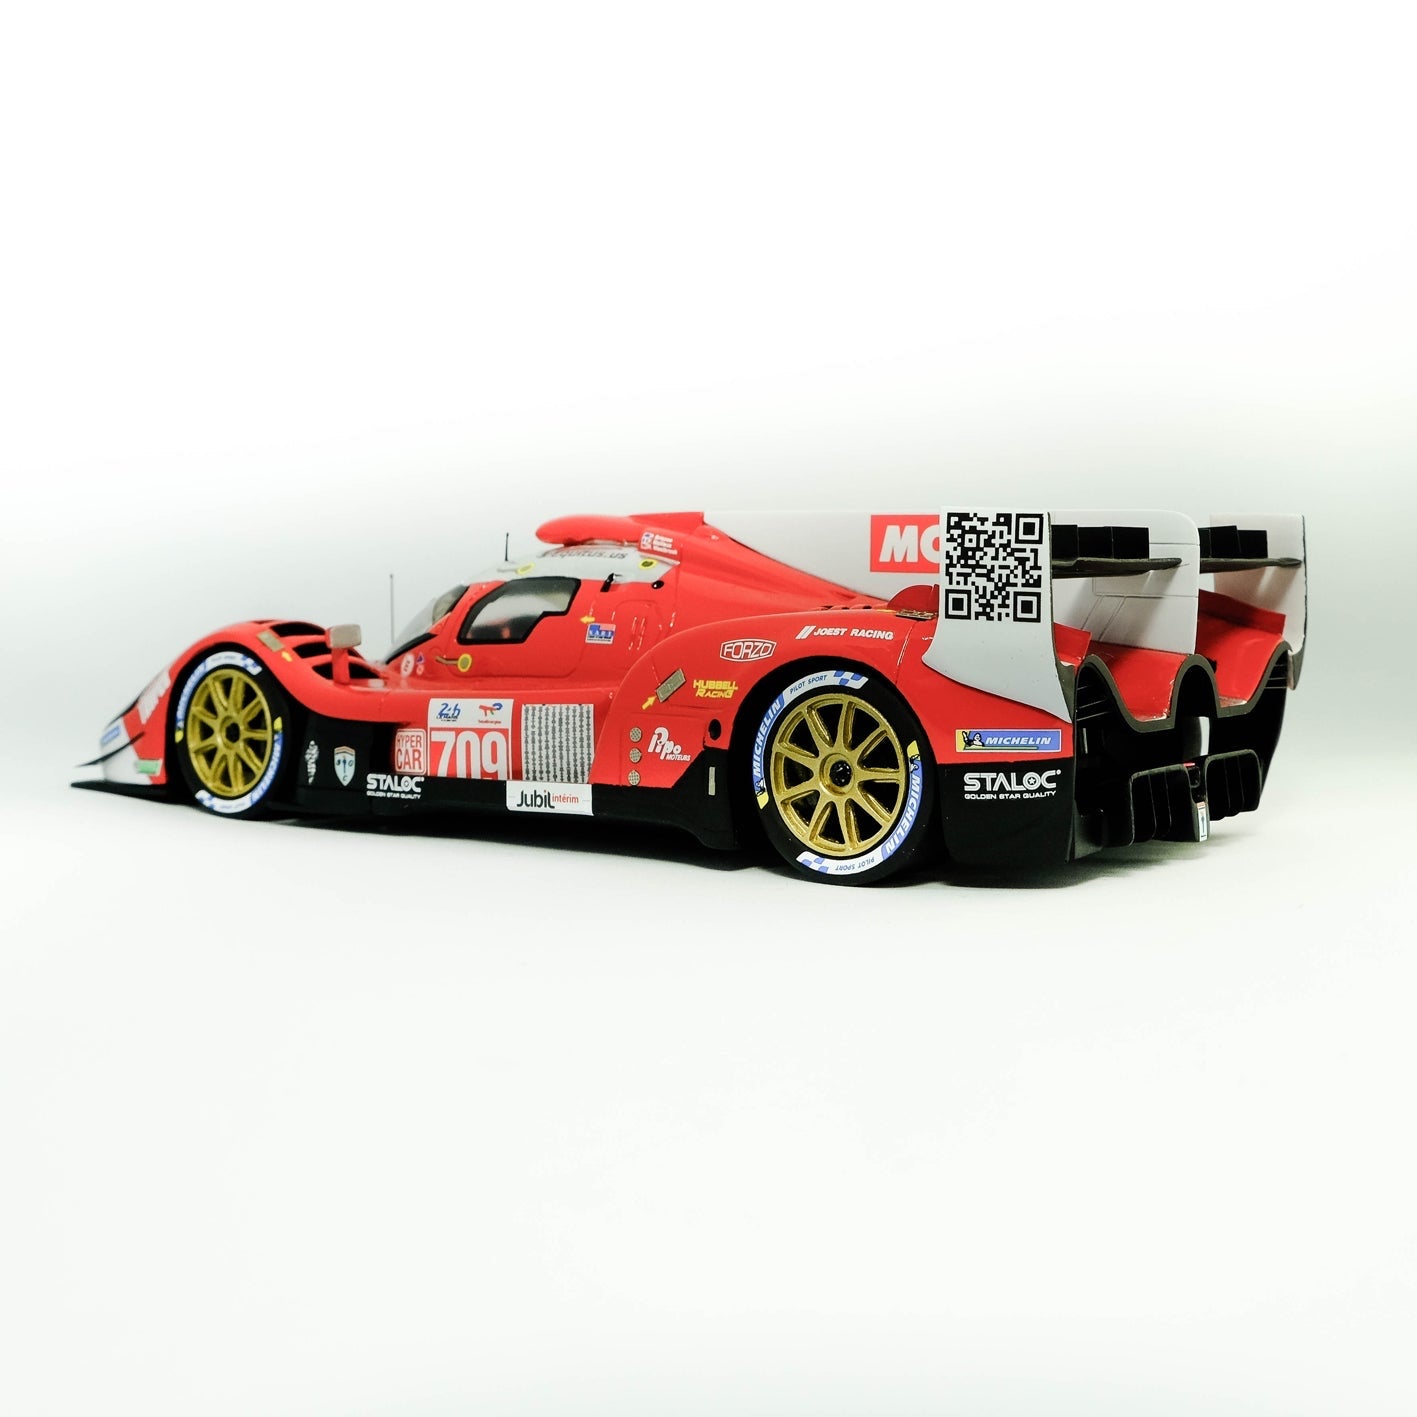 GLICKENHAUS SC G007 LMH - FIA WEC 6 HOURS OF MONZA & 24 HOURS LE MANS